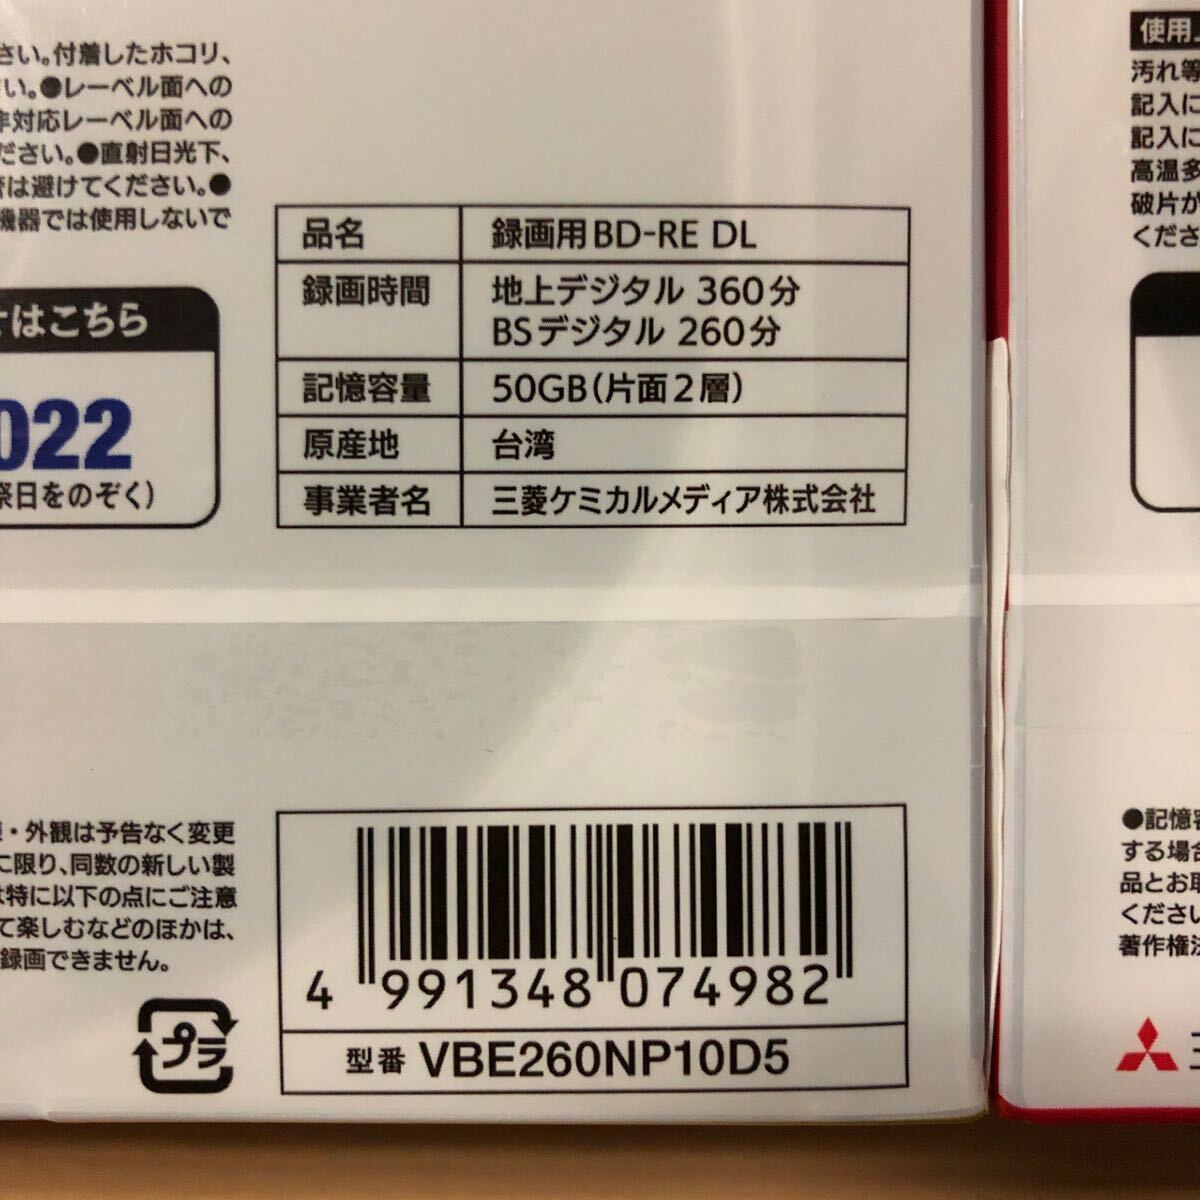 [ total 20 sheets ] Mitsubishi video recording for BD-RE DL 50GB 2 speed 10 sheets pack VBE260NP10D5 total 2 piece set 